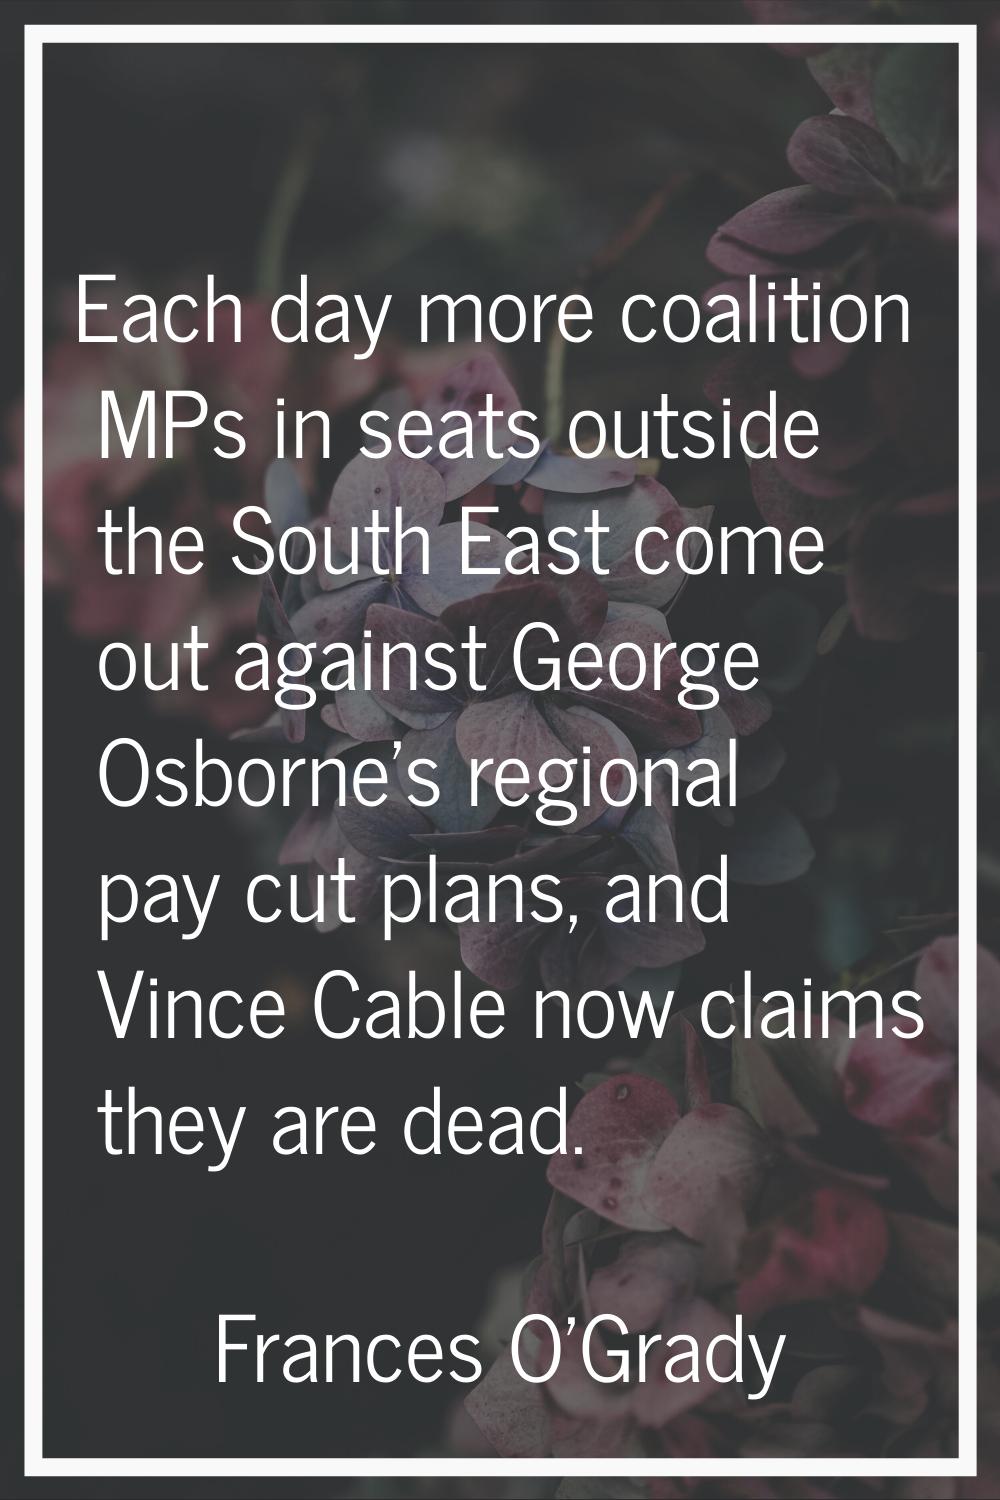 Each day more coalition MPs in seats outside the South East come out against George Osborne's regio